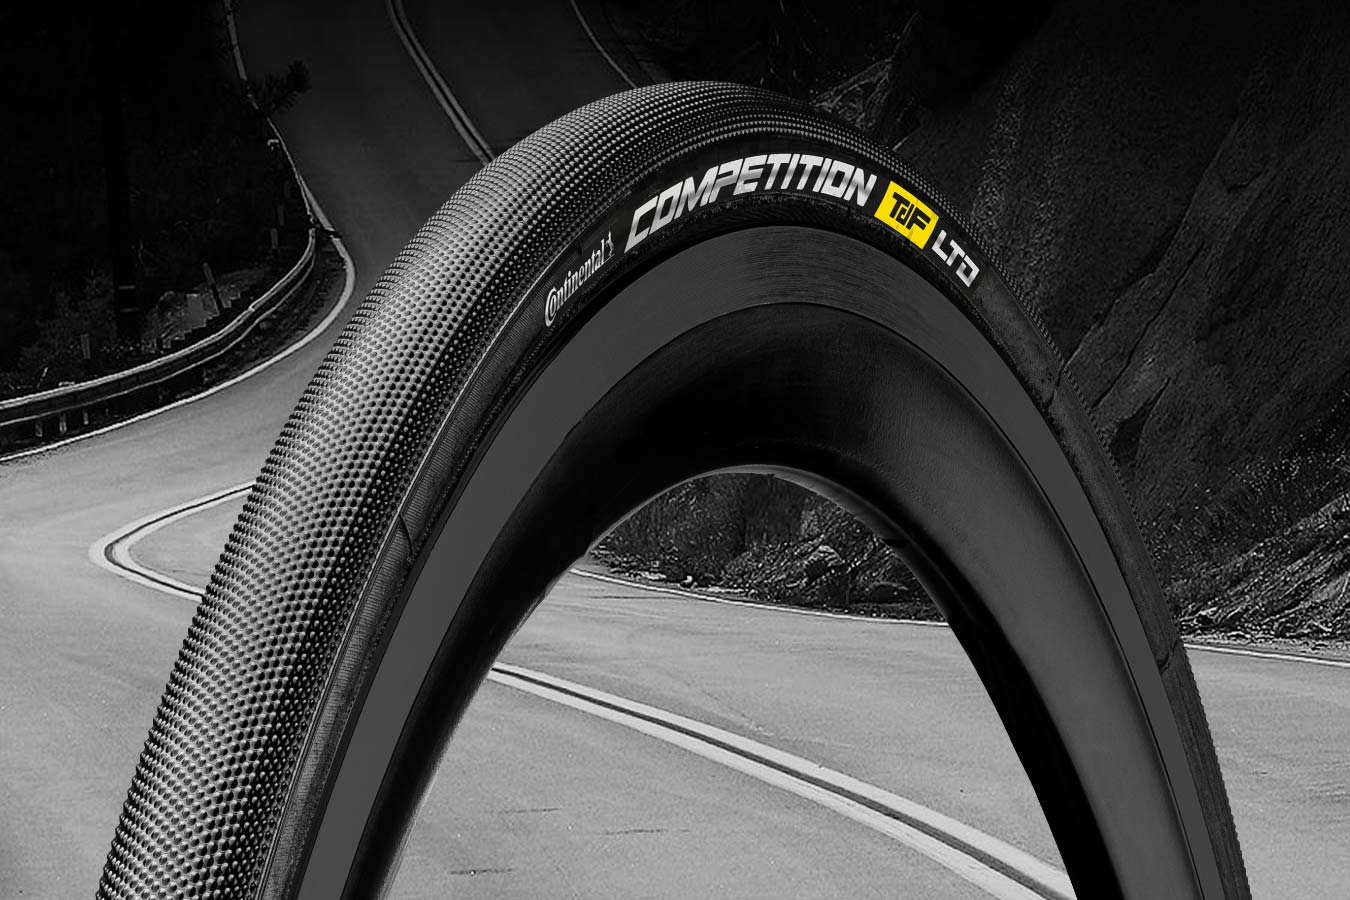 continental competition tubular 25mm